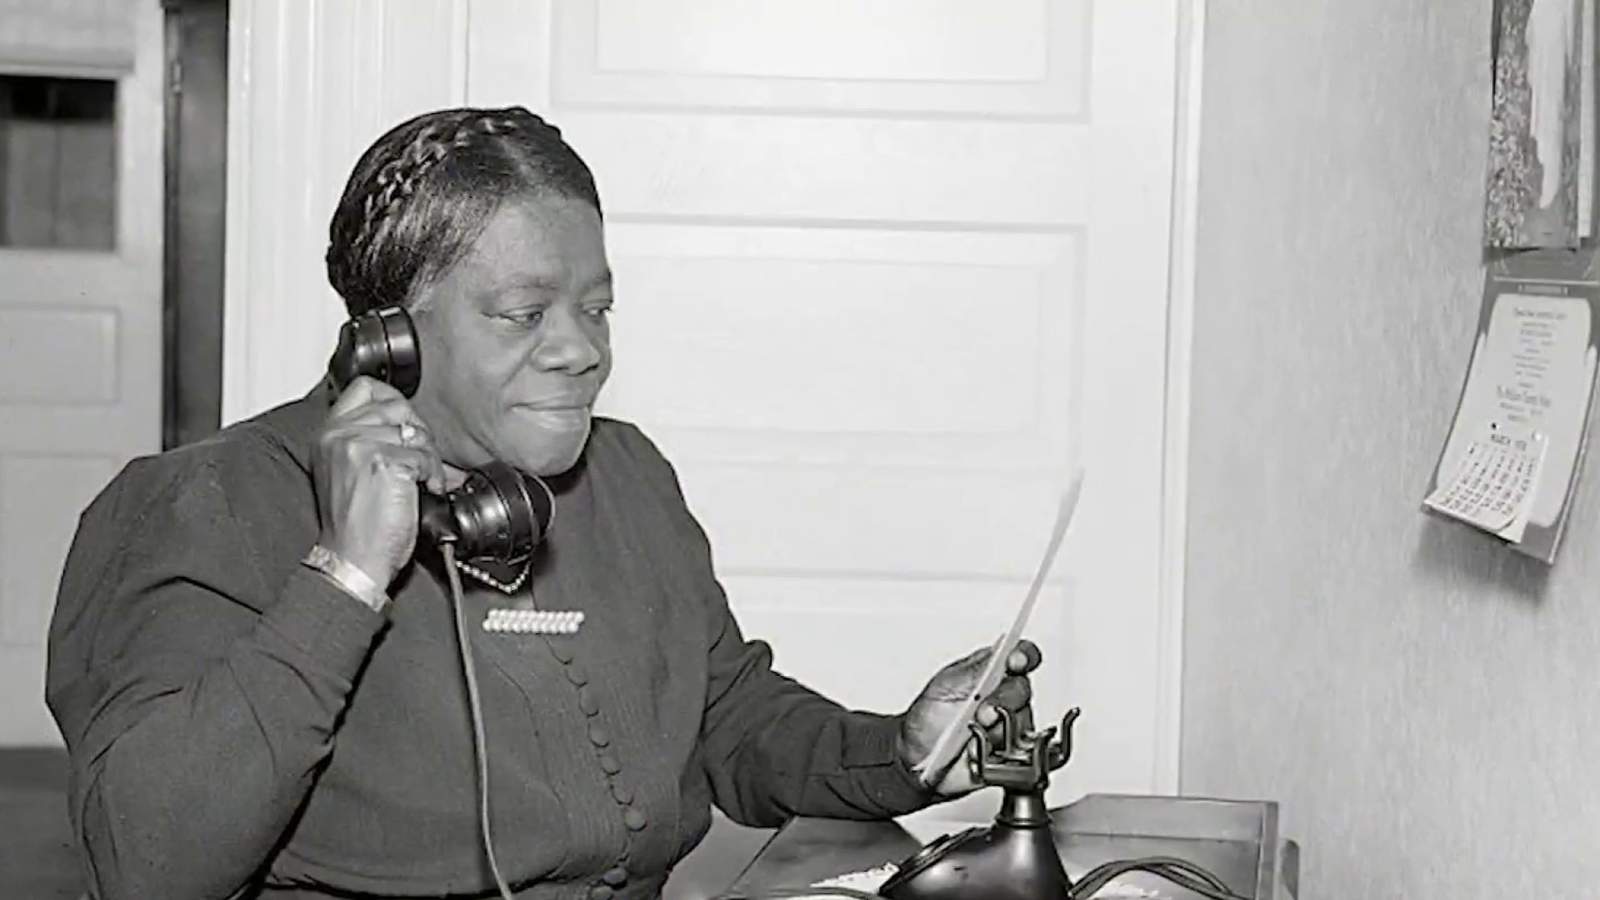 Remembering the life and legacy of Dr. Mary McLeod Bethune